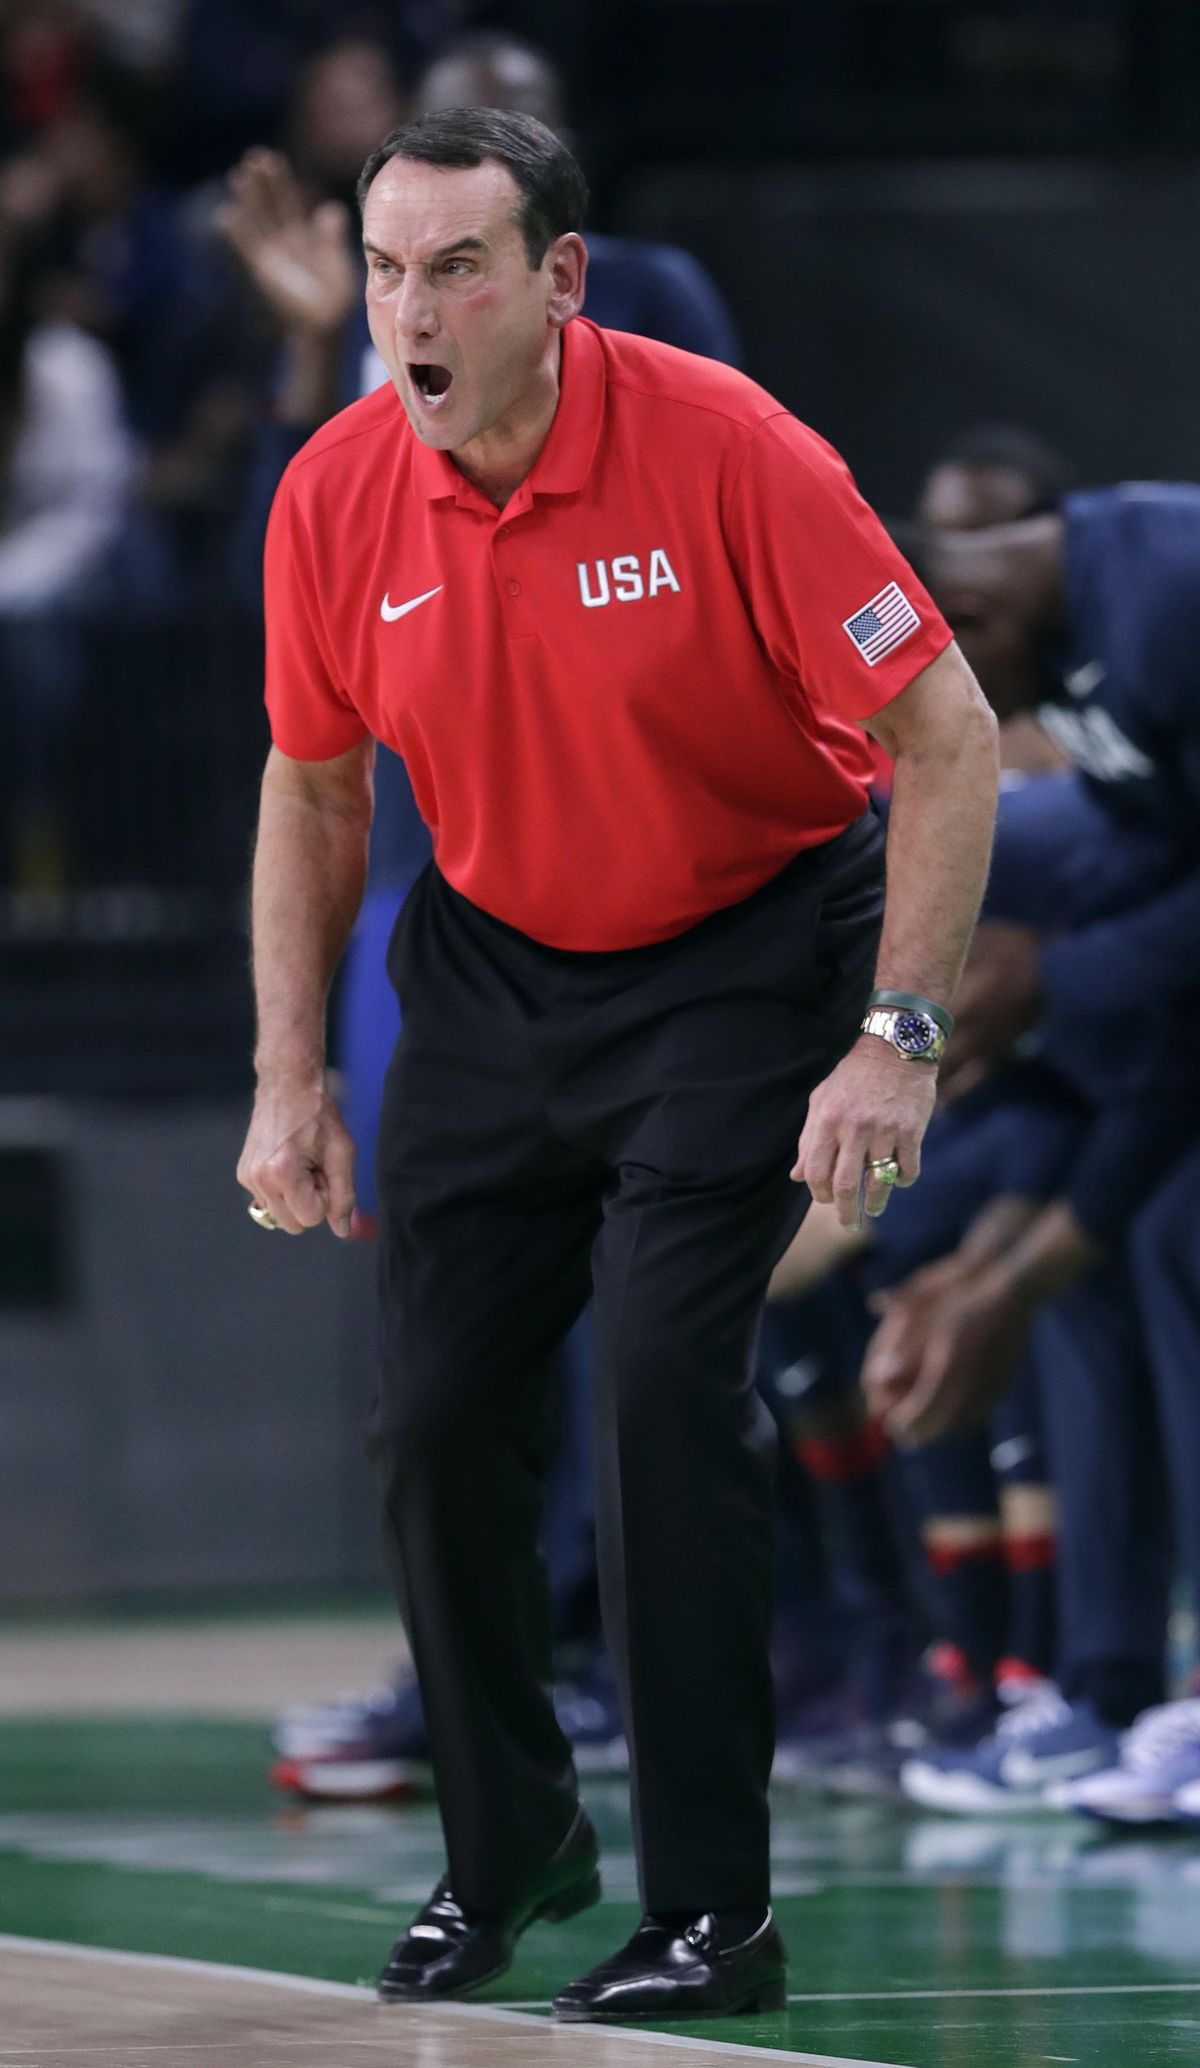 United States head coach Mike Krzyzewski reacts on the bench during a basketball game against Australia. (Charlie Neibergall / Associated Press)